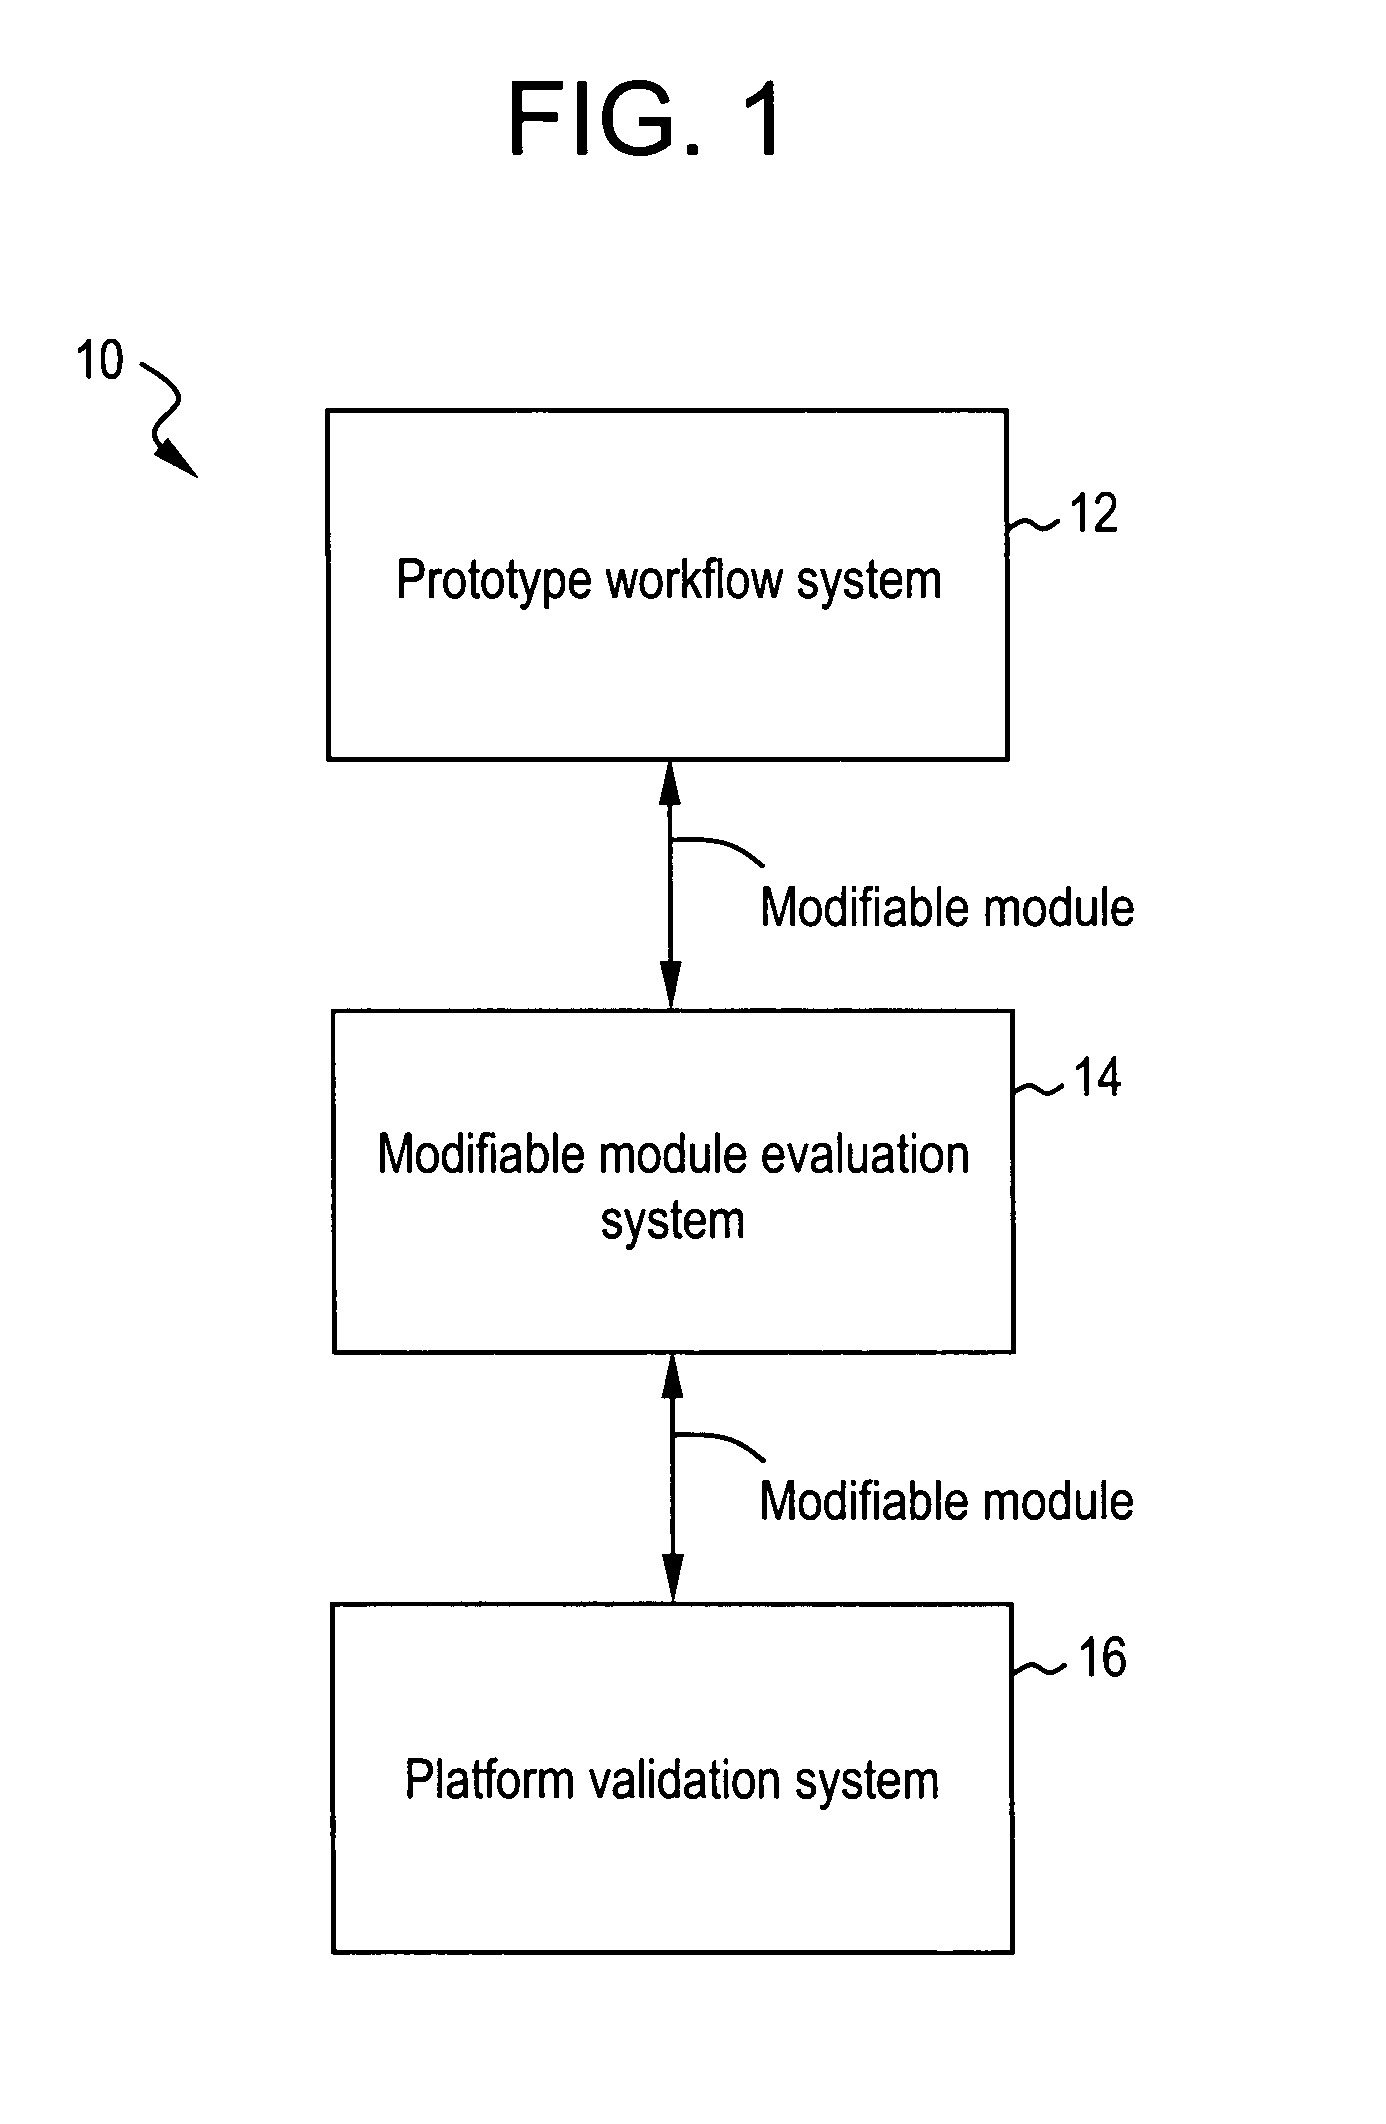 System and method for improved surgical workflow development